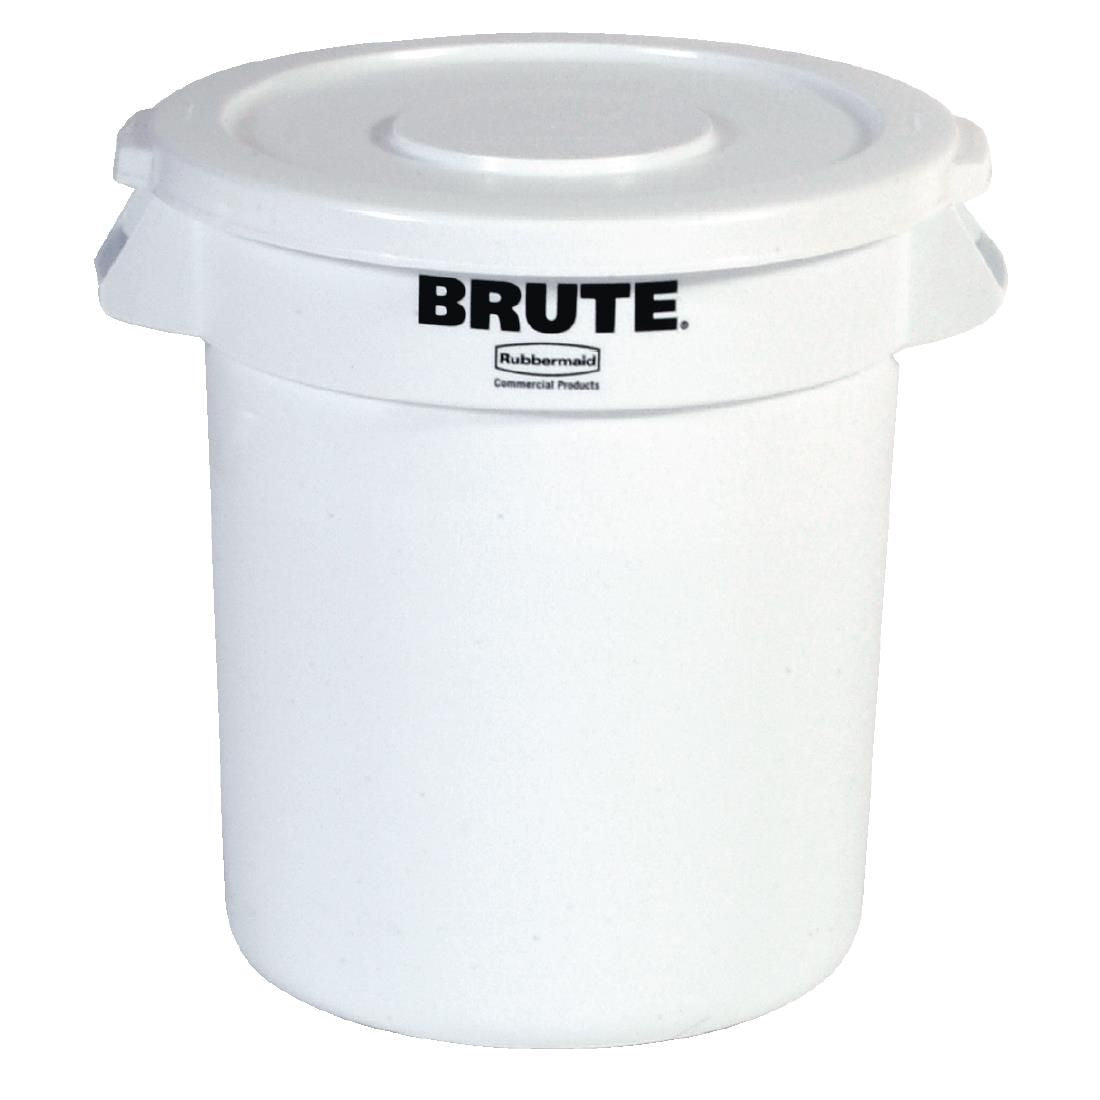 L651 Rubbermaid Round Brute Container 37.9Ltr